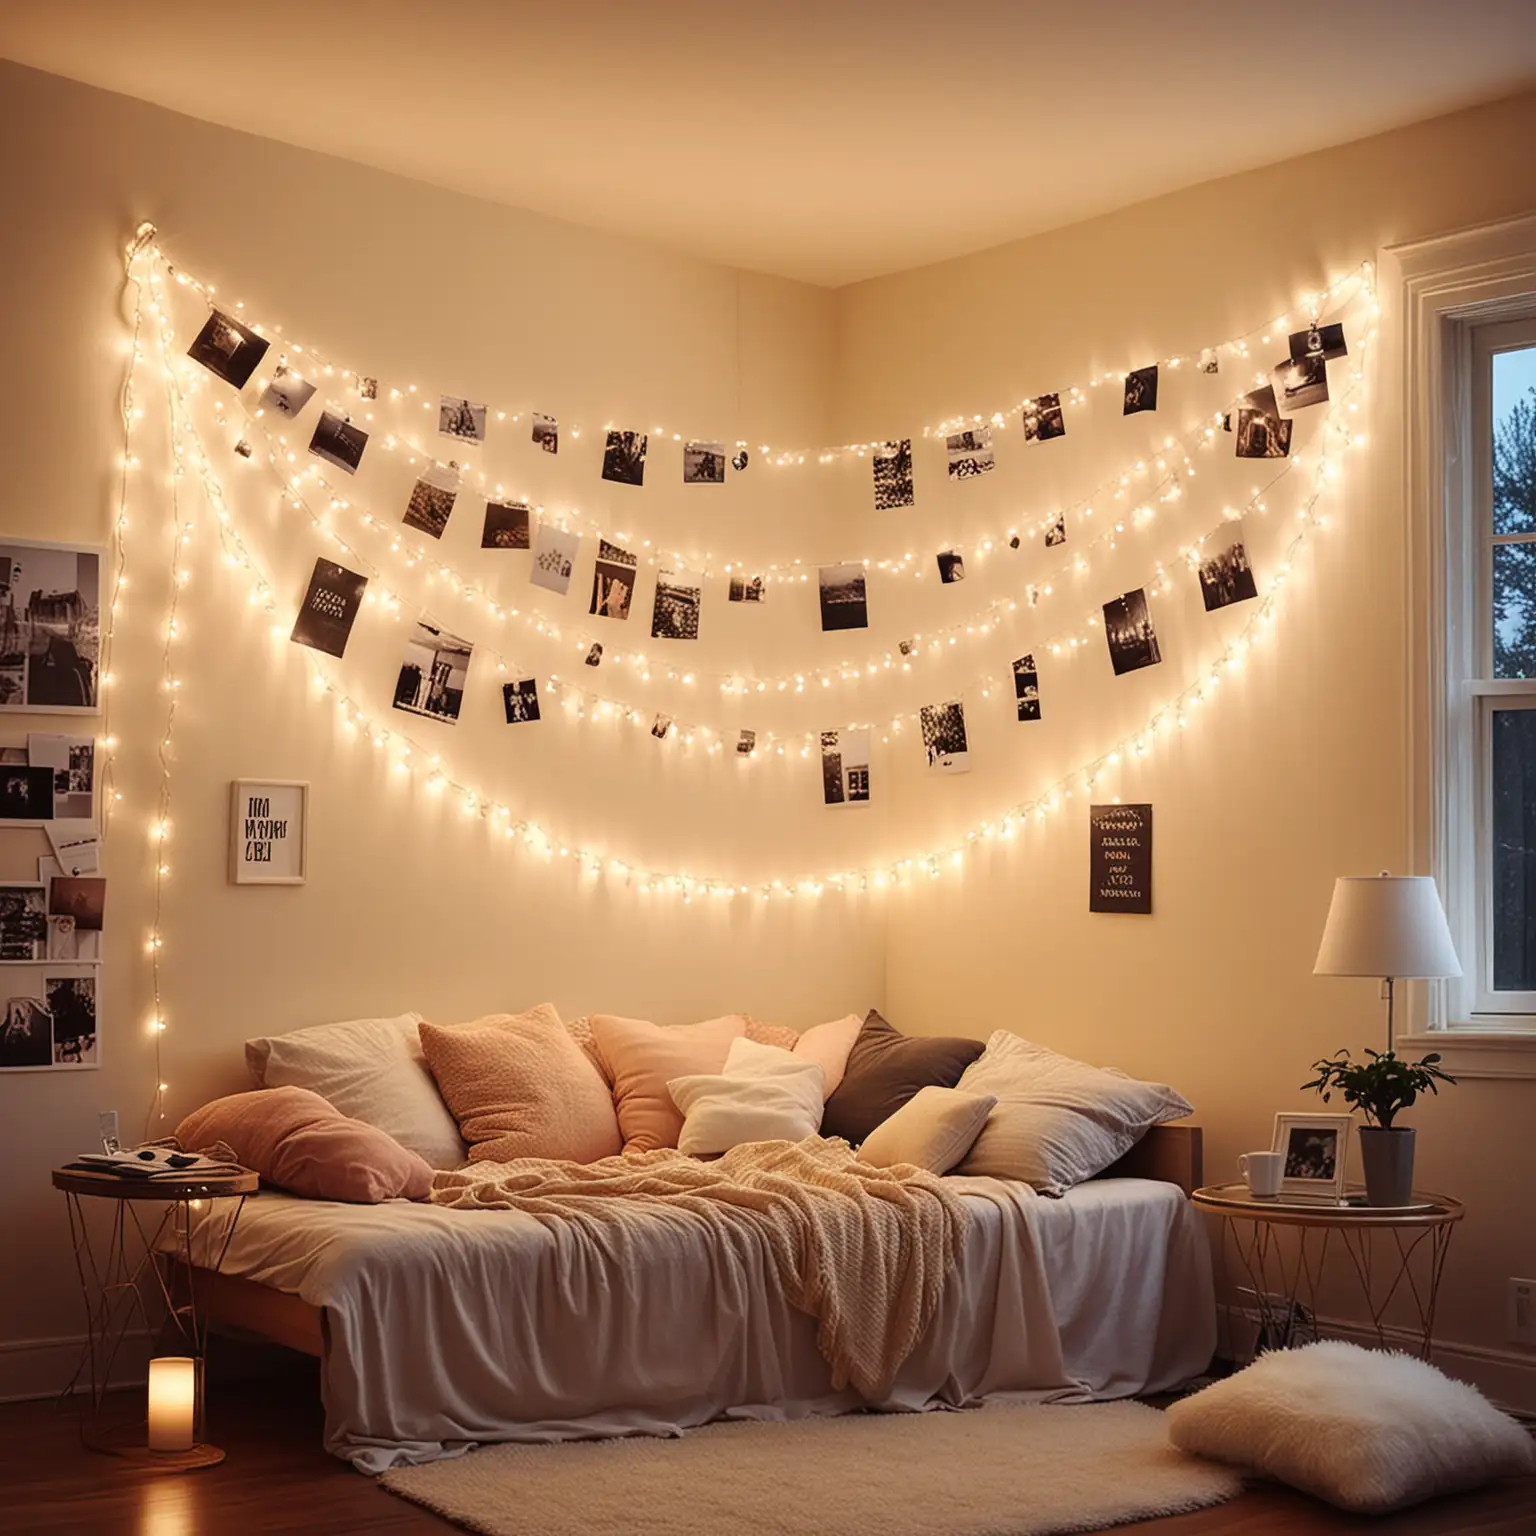 Cozy Dorm Living Room Decor with String Lights Warm and Welcoming Atmosphere